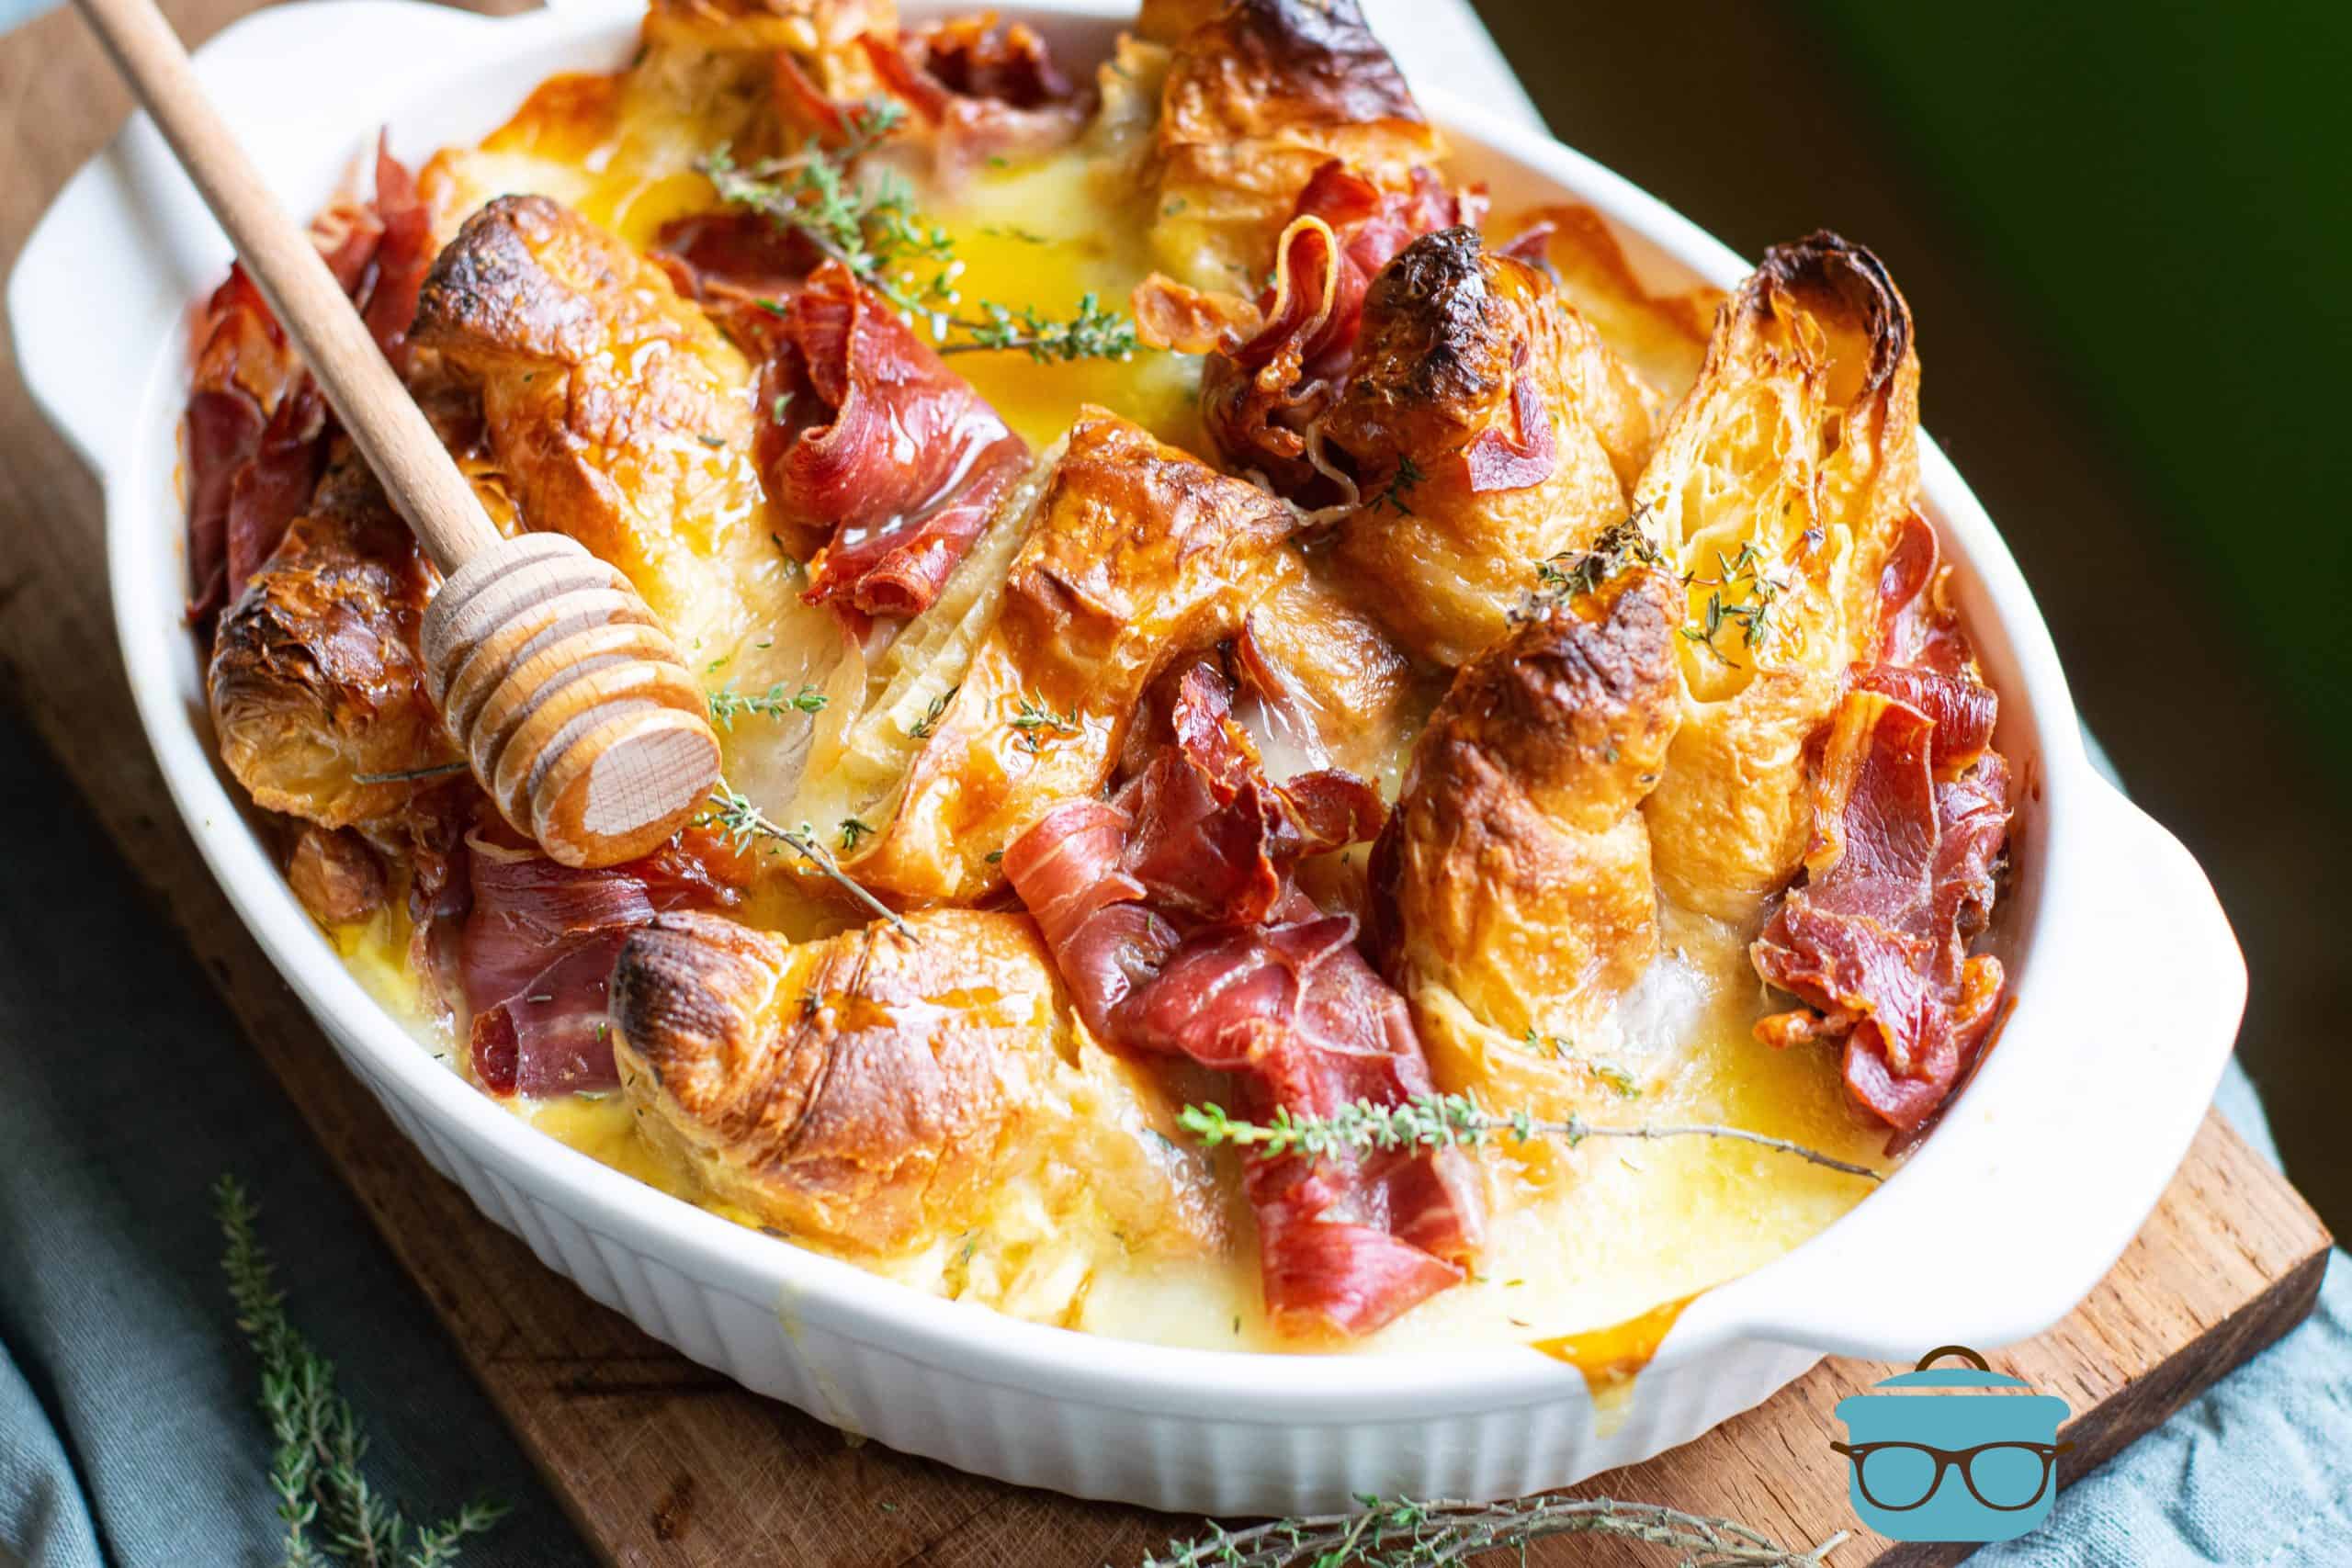 fully baked ham and cheese croissant bake in a white oval baking dish on top of a wooden cutting board.